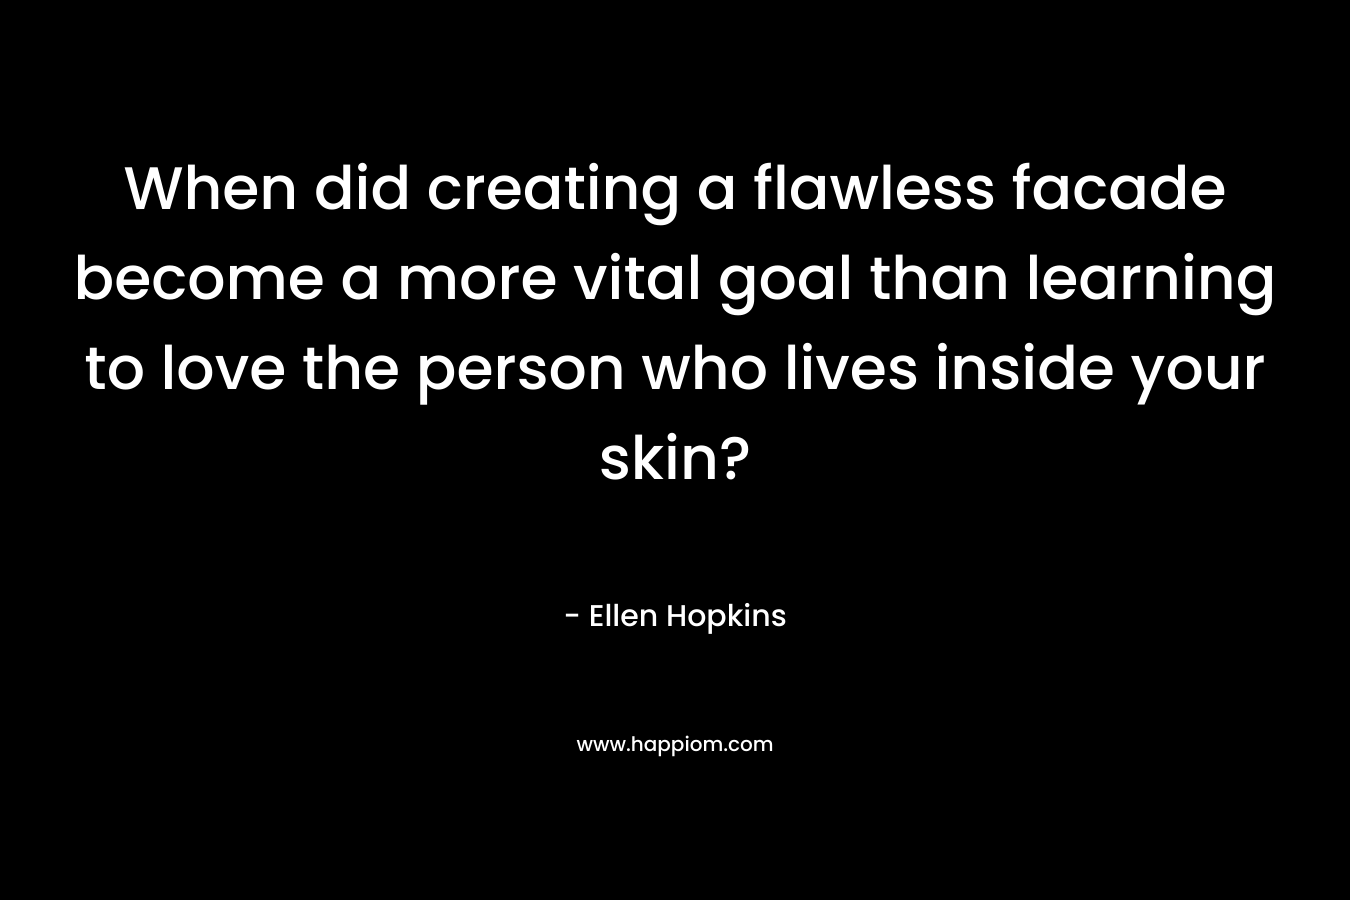 When did creating a flawless facade become a more vital goal than learning to love the person who lives inside your skin?